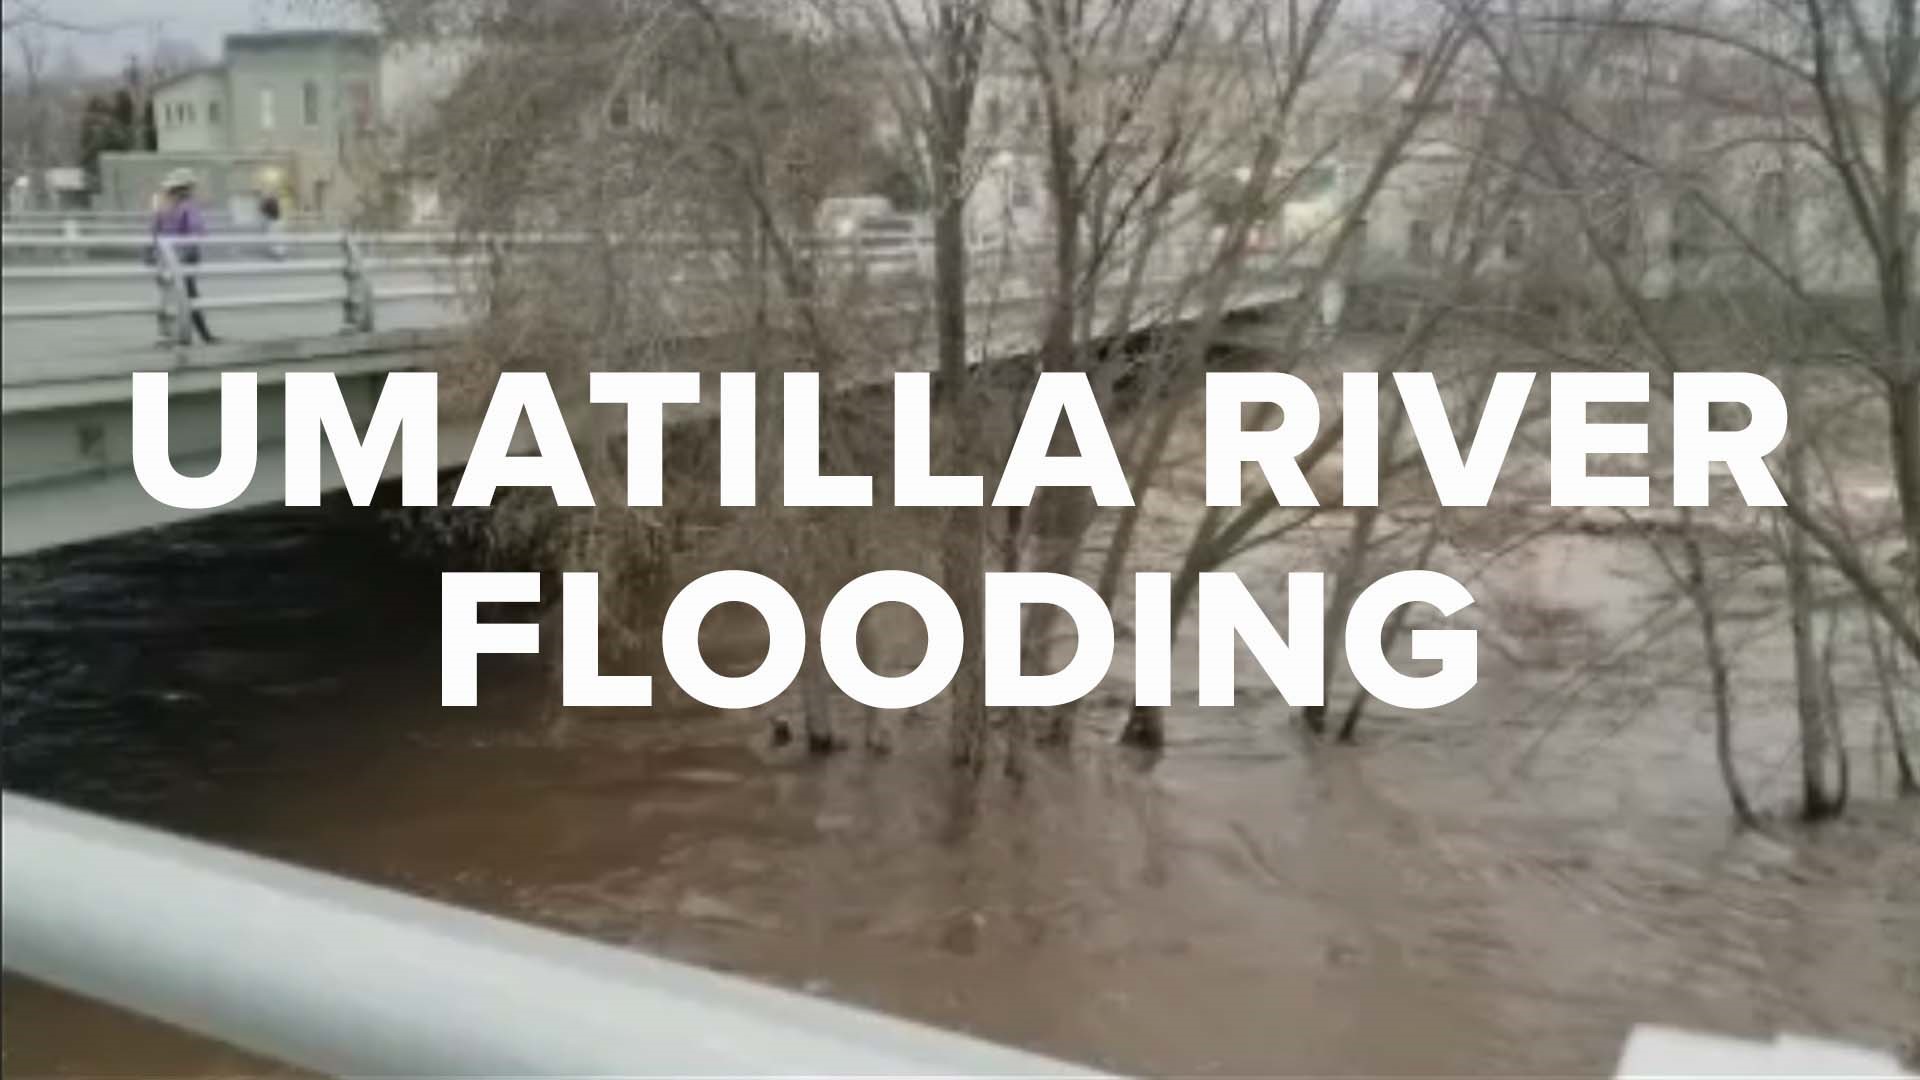 The Umatilla River flooded on Thursday, causing school and road closures in Pendleton.